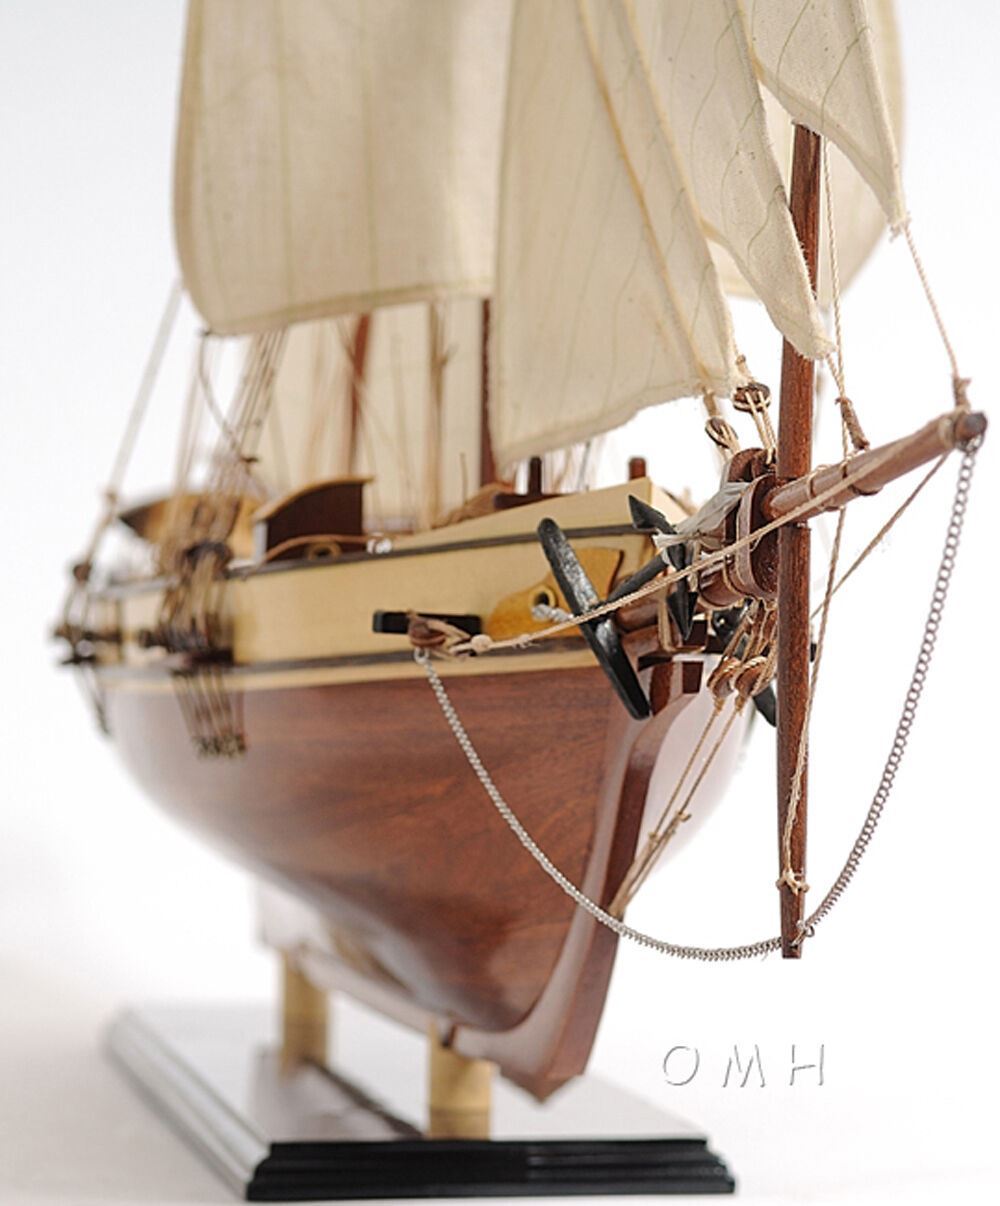 ALDO > Hobbies & Creative Arts> Collectibles> Scale Model Harvey Baltimore Clipper Tall Ship Large Wood Model Boat  Assembled